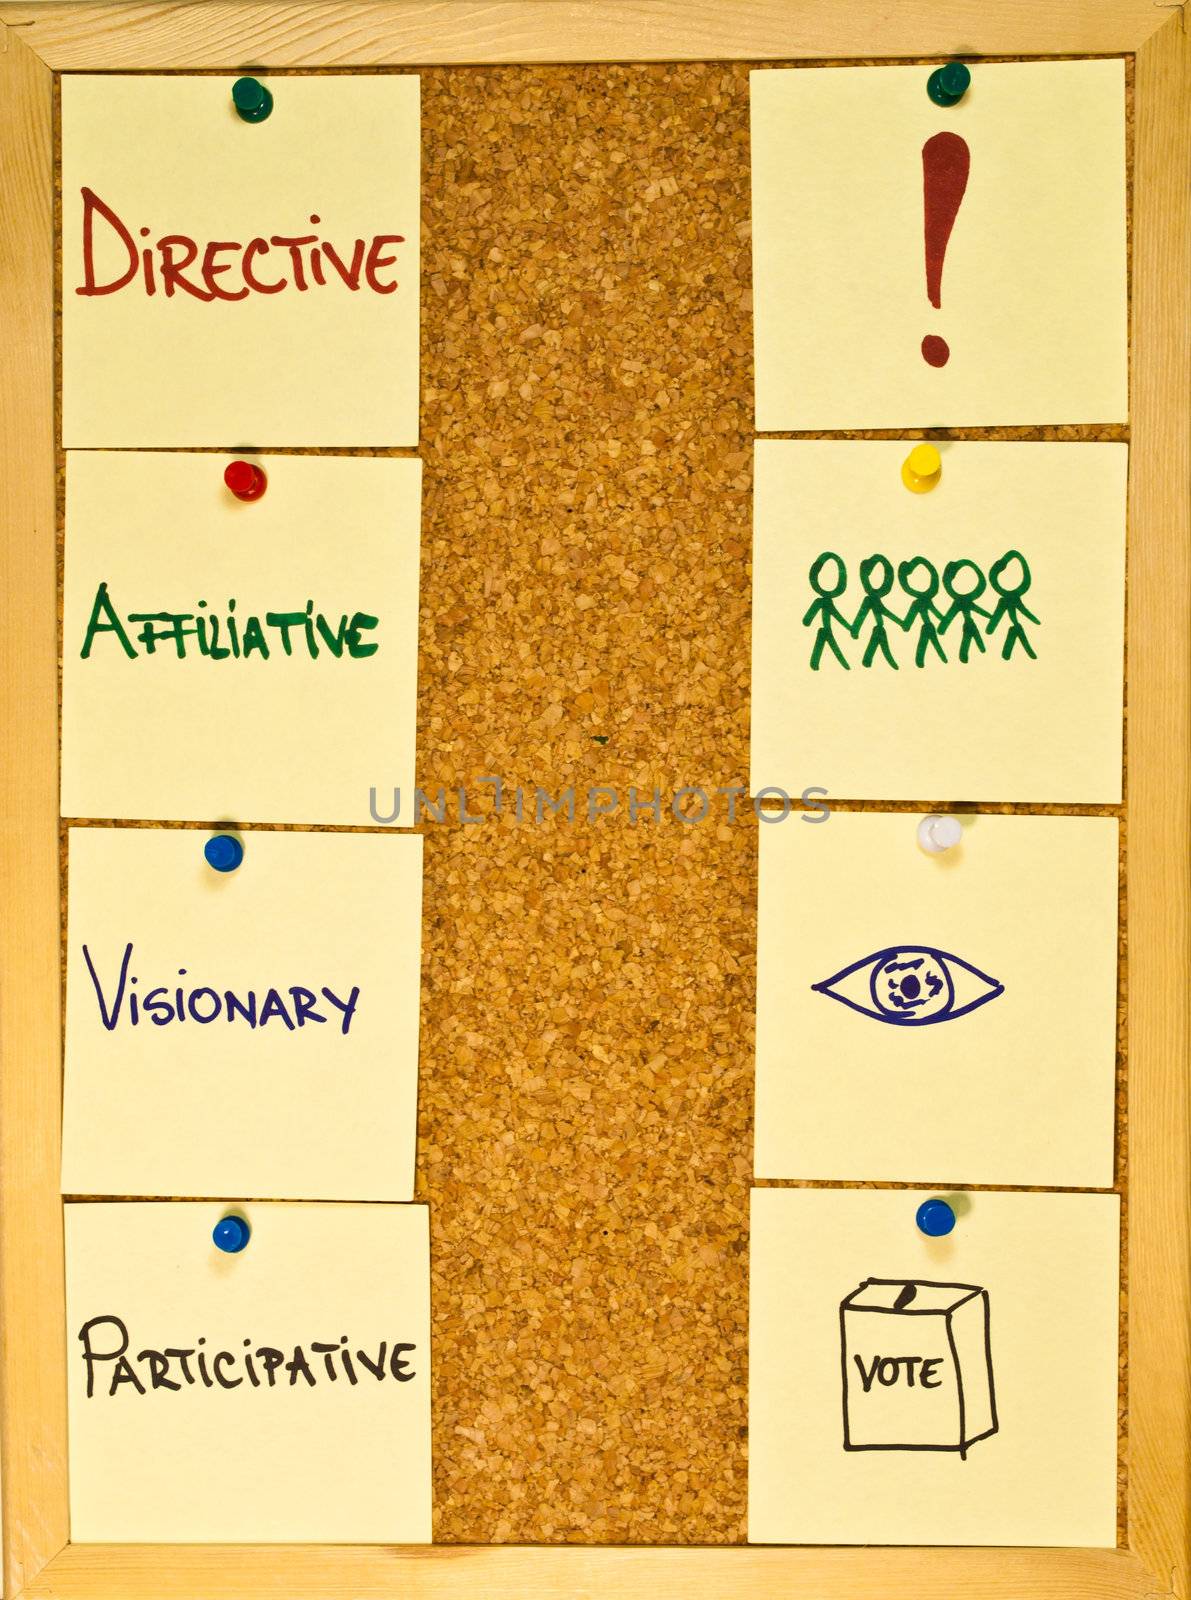 Post it notes on a wooden board representing four leadership styles